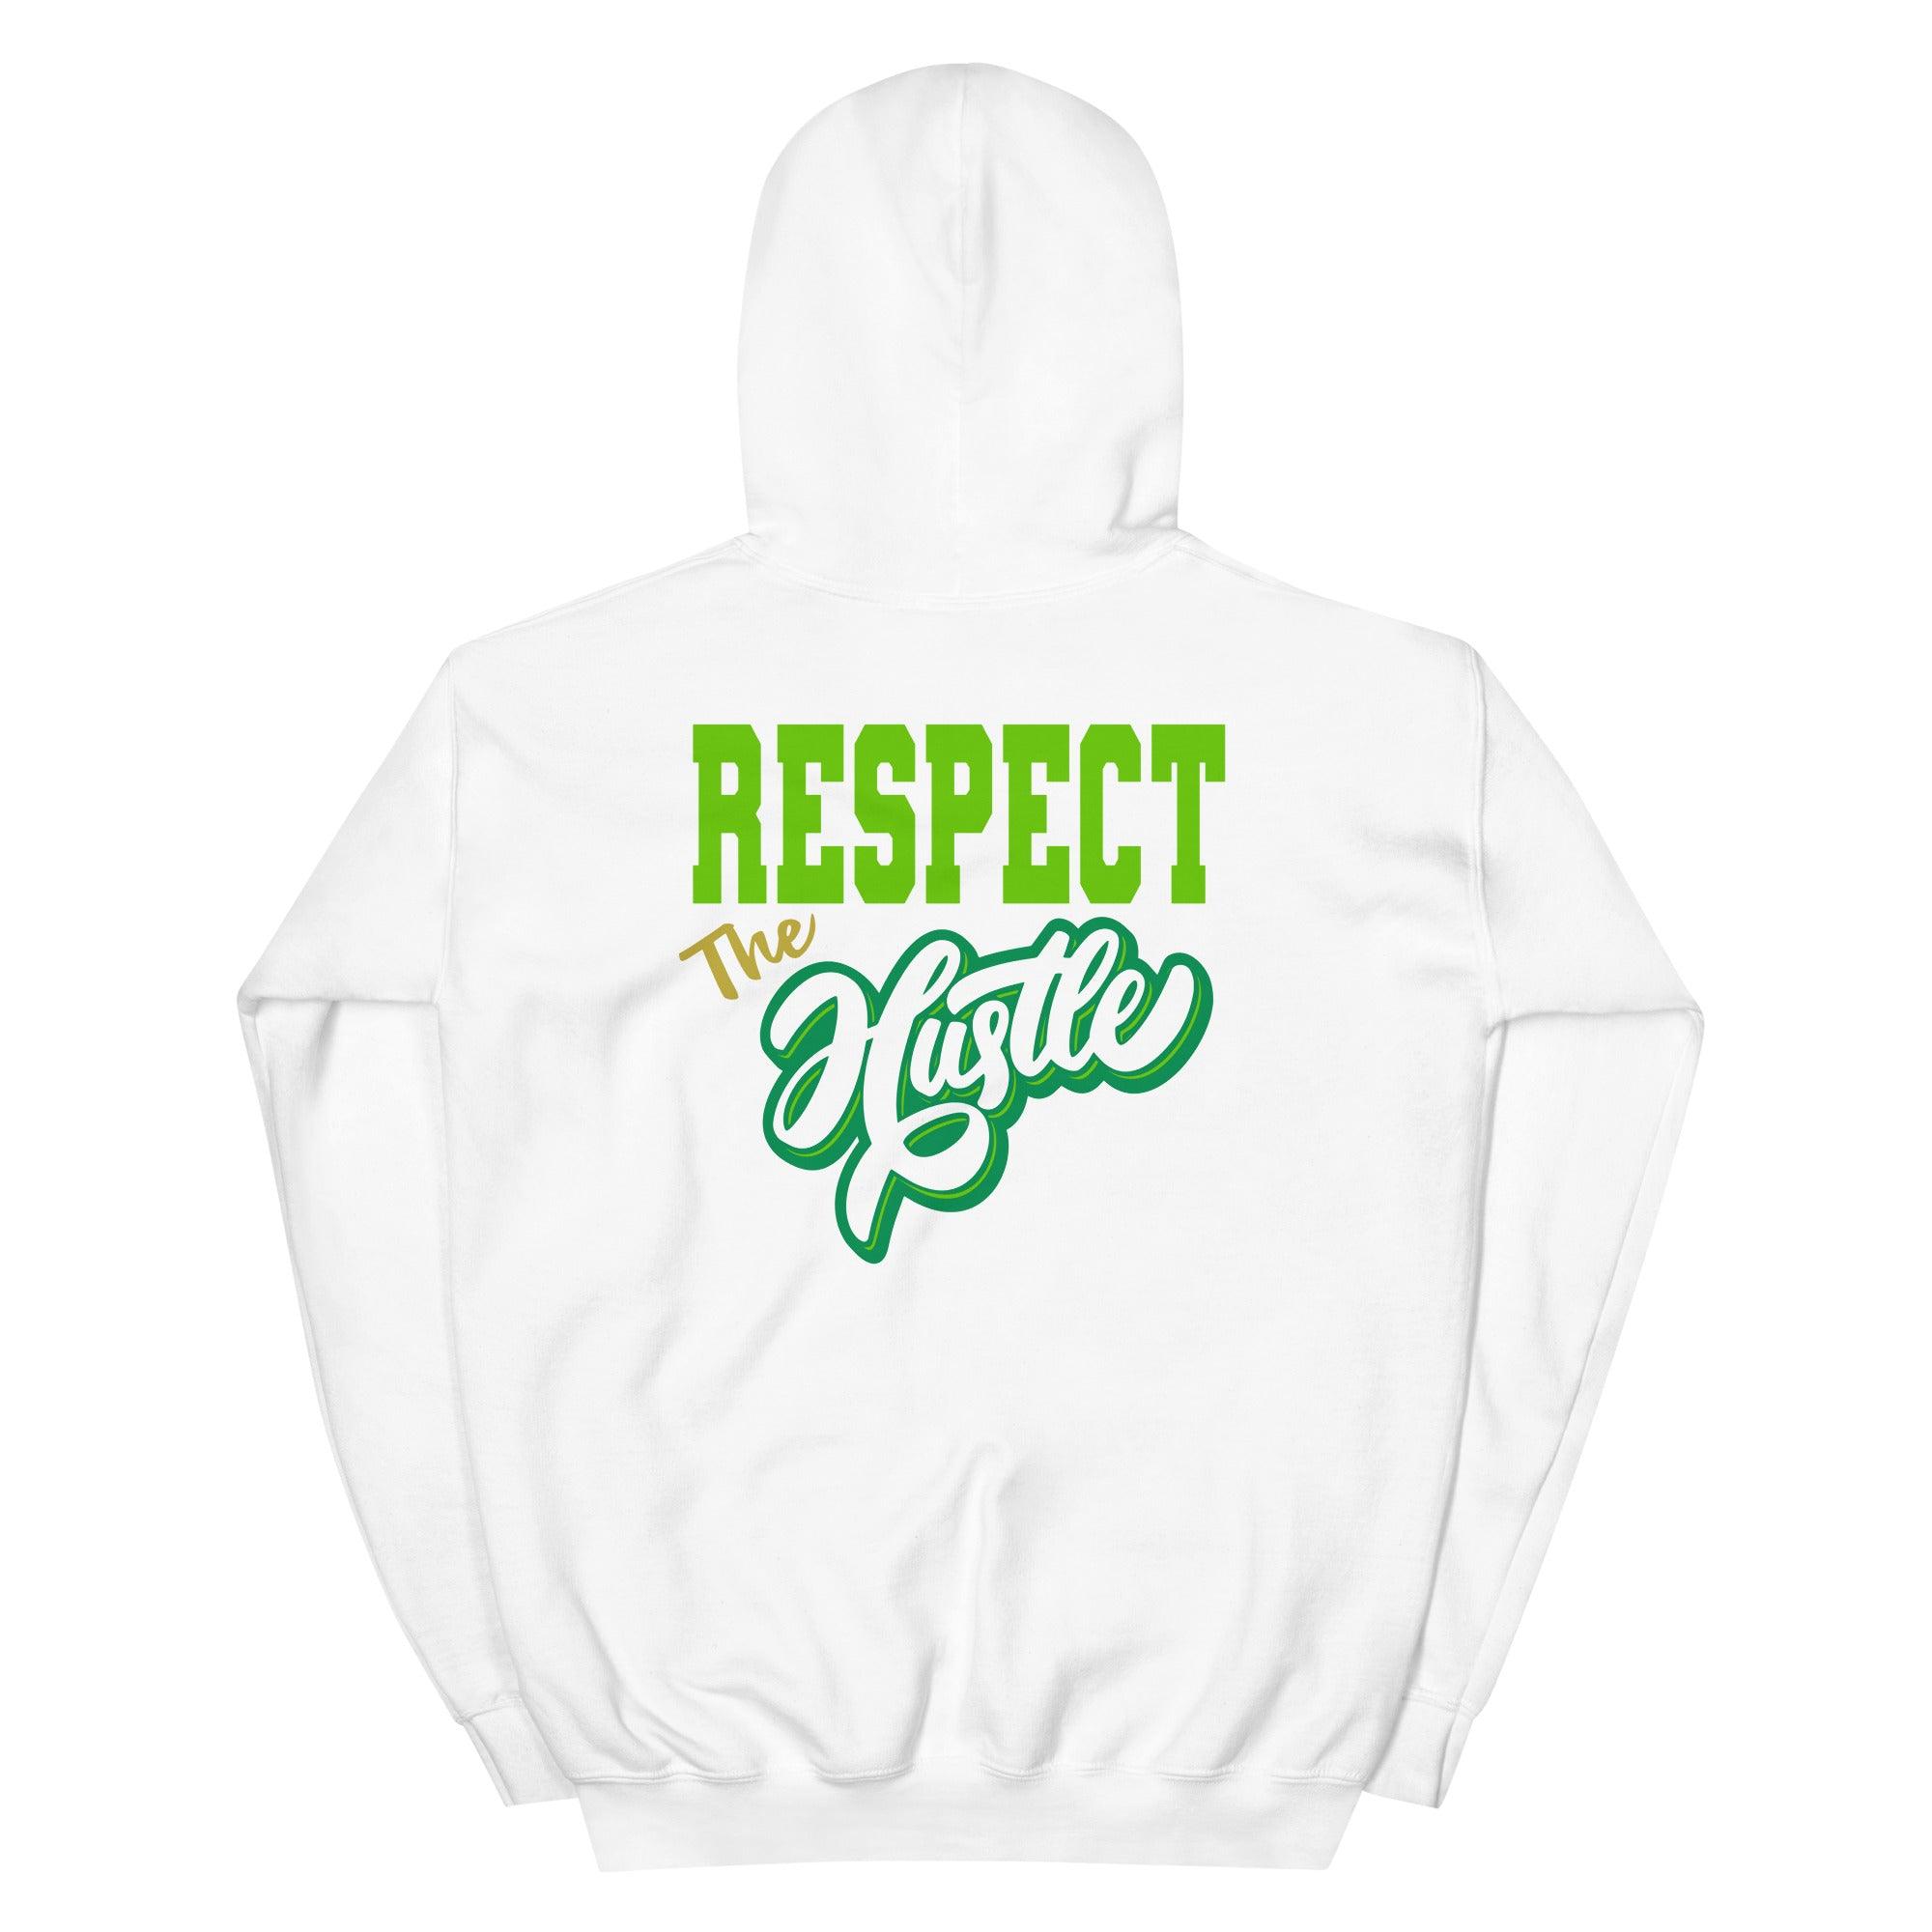 White Respect The Hustle Hoodie Nike Air Max 90 St Patricks Day 2021 photo